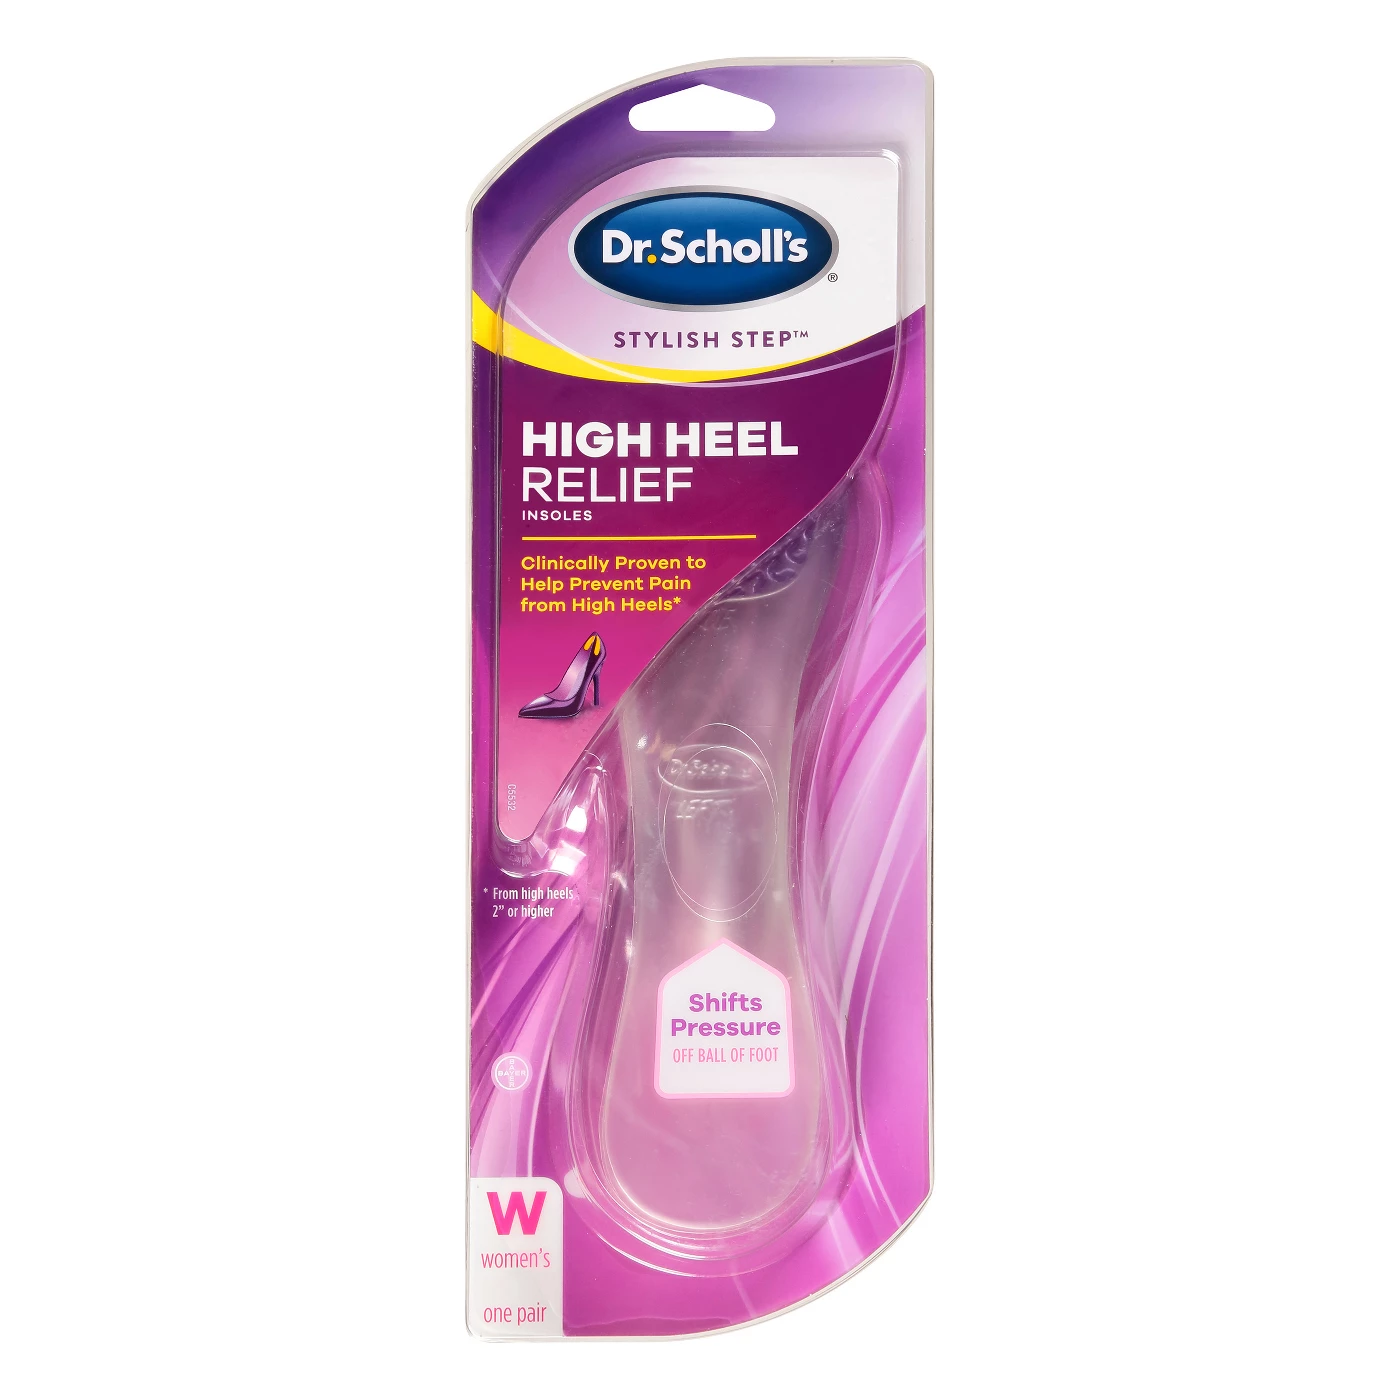 Dr. Scholl's Stylish Step High Heel Relief, 1 Pair - image 1 of 2